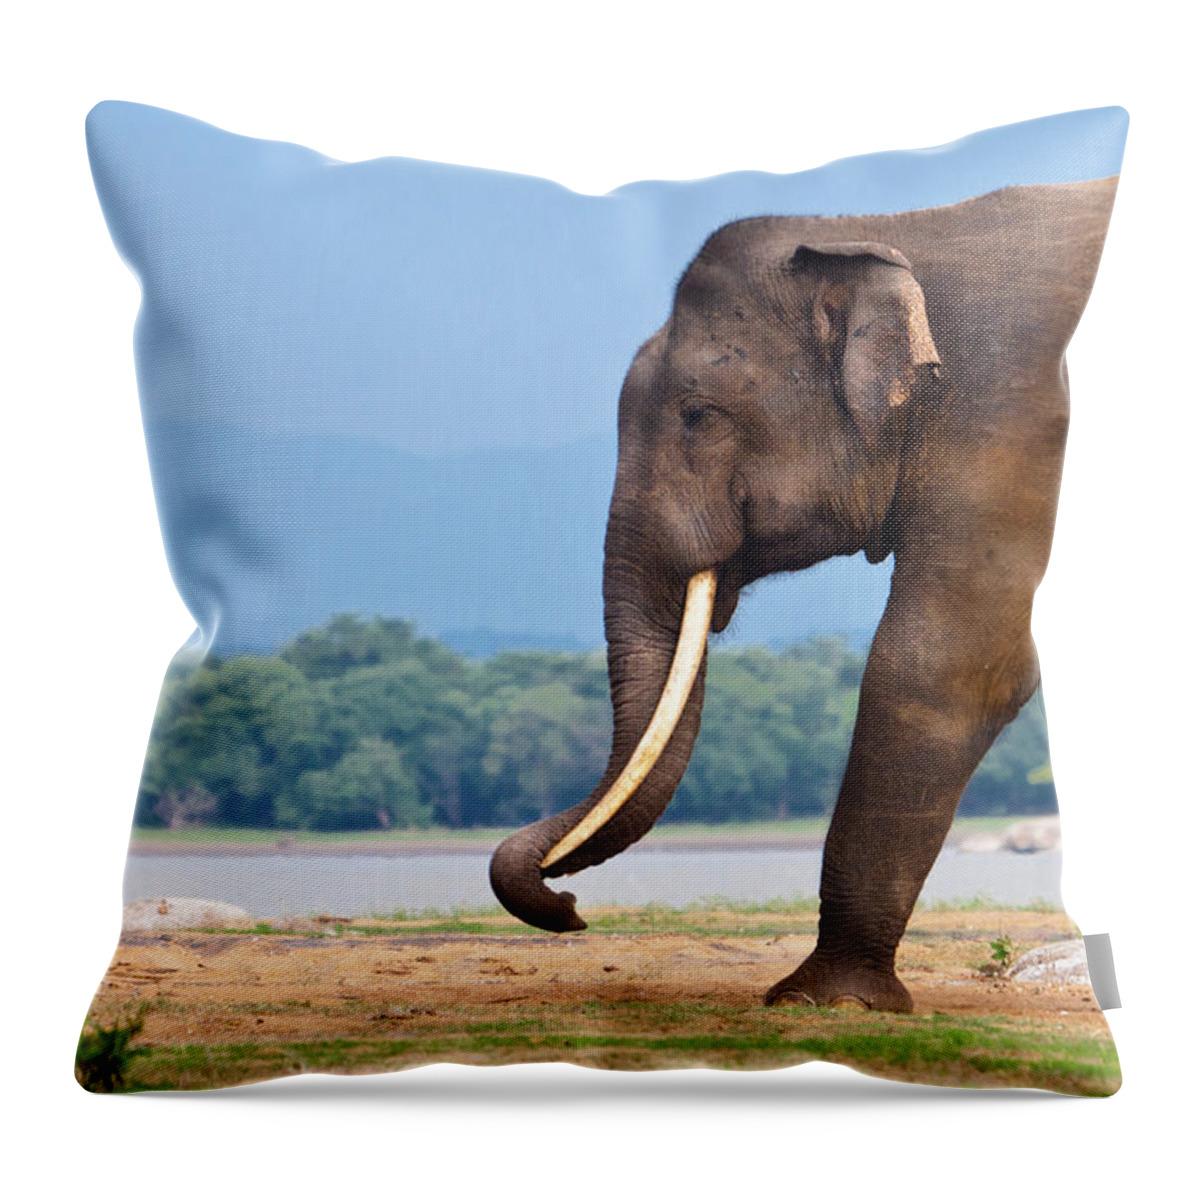 Standing Water Throw Pillow featuring the photograph Wild Tusker In Kalawewa by Dhammika Heenpella / Images Of Sri Lanka